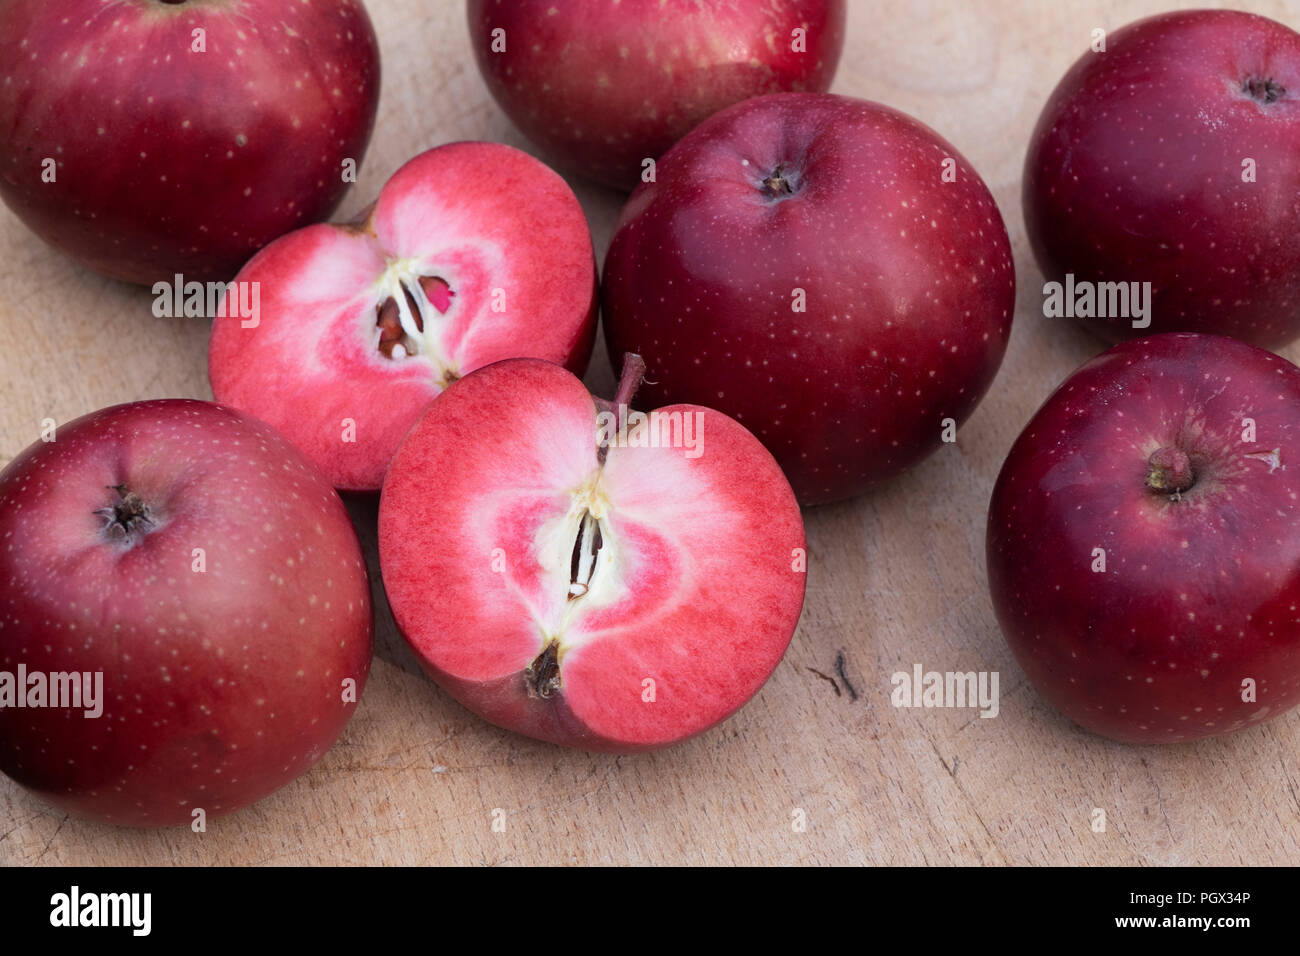 Malus domestica ‘Tickled pink’ / Baya marisa. Harvested Apple ‘Tickled pink’.  Cut in half to show the red flesh Stock Photo